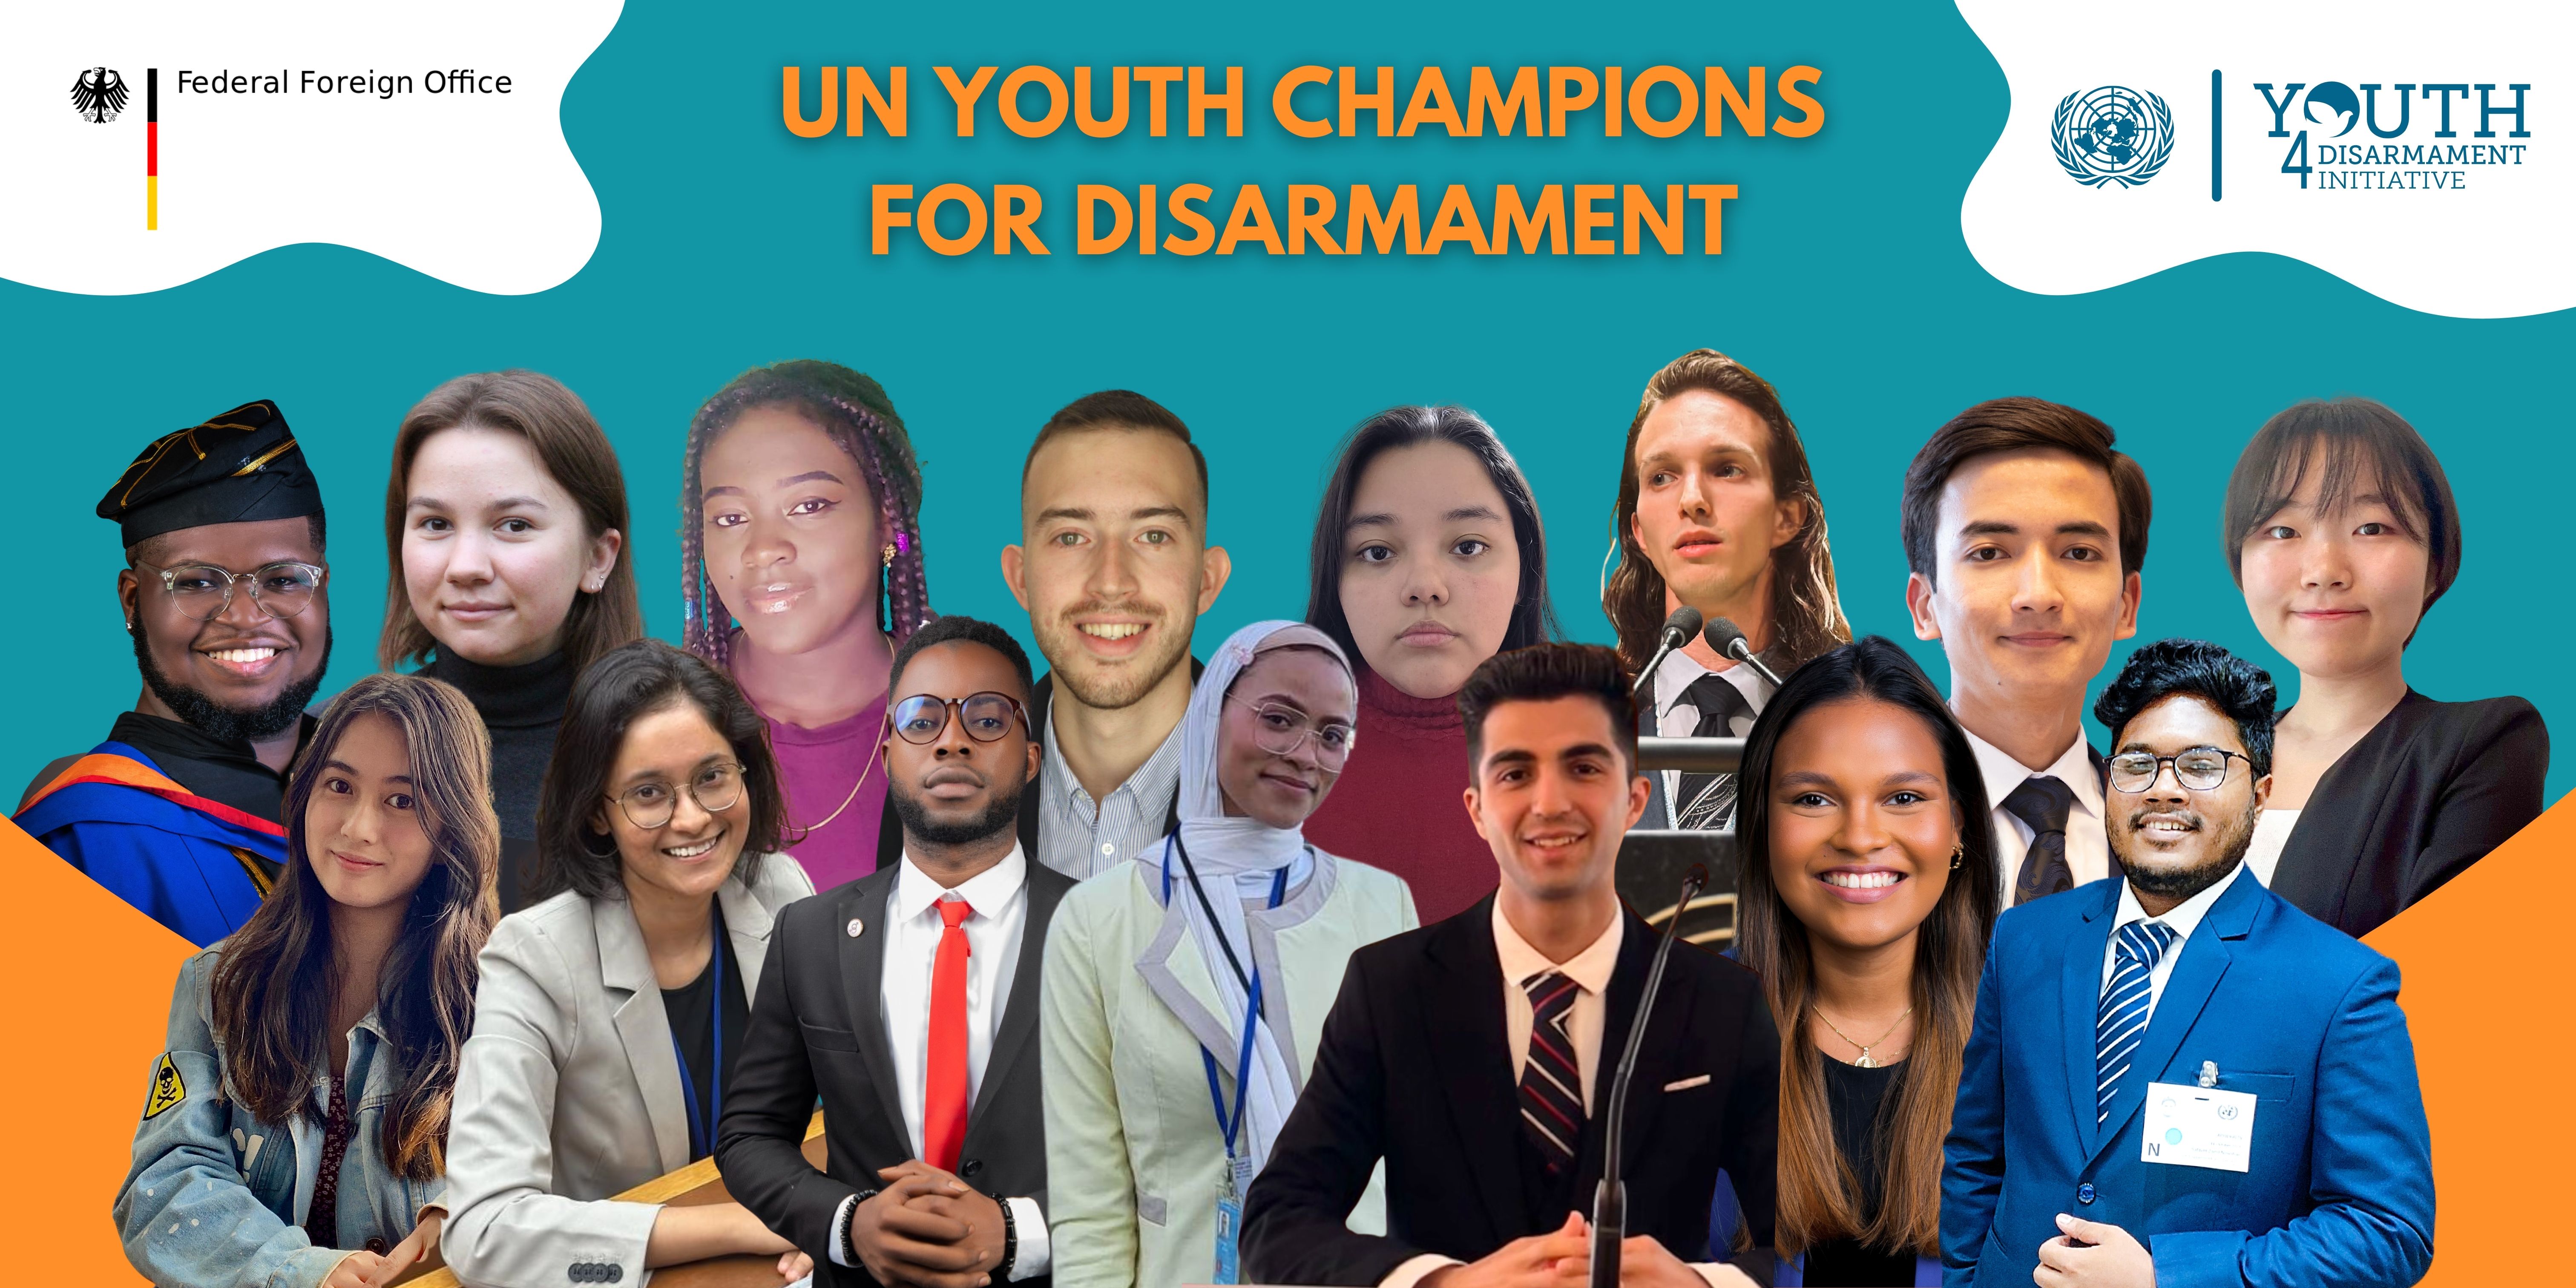 Promotional banner with all of the UN Youth Champions for Disarmament